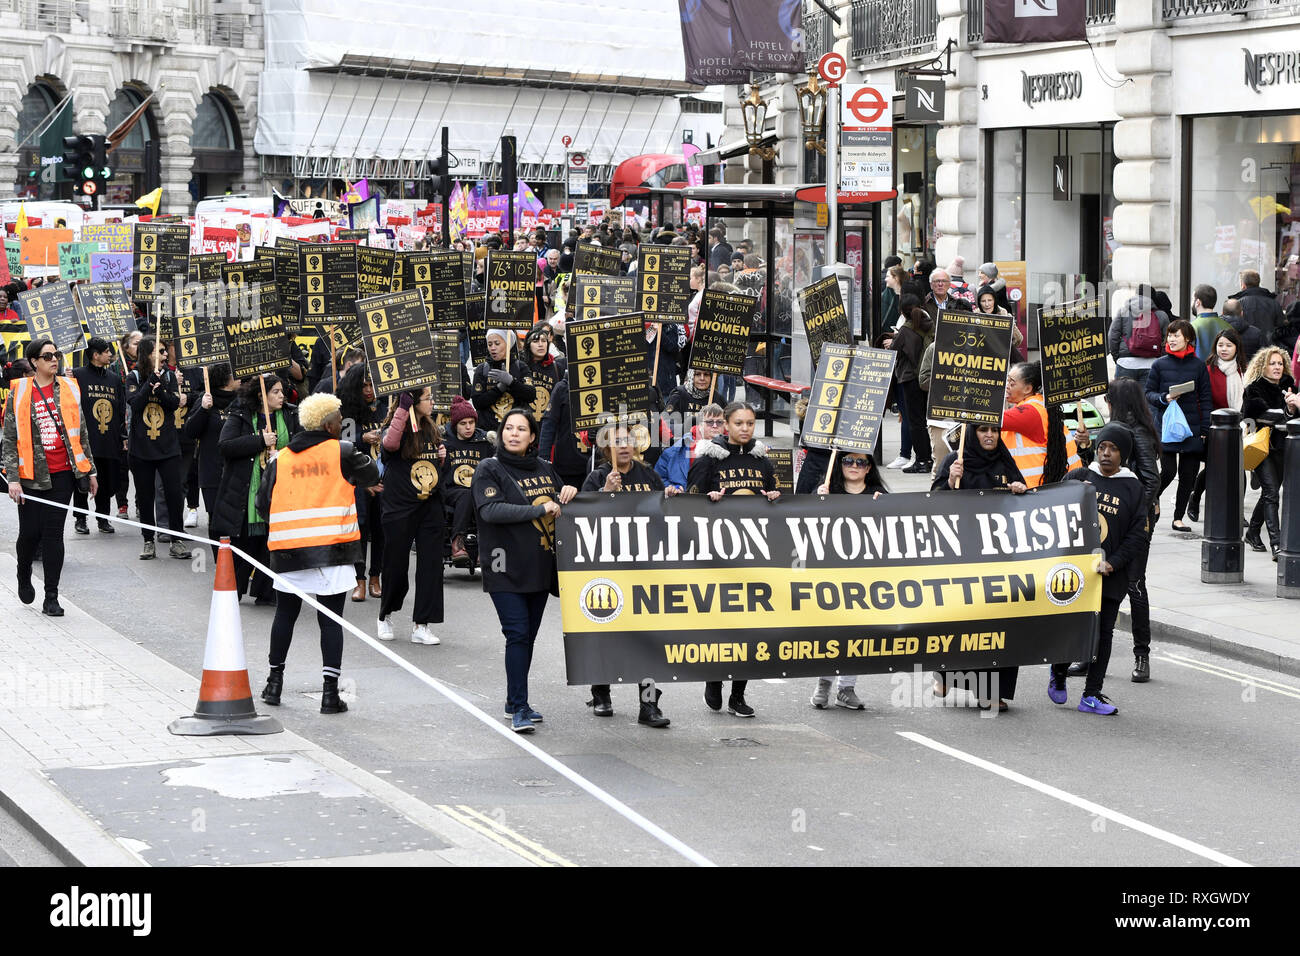 London, Greater London, UK. 9th Mar, 2019. A large banner seen at the front of the march during the Million women's rise march in London.Thousands of women marched through central London to a rally in Trafalgar Square in London demanding freedom and justice and the end of male violence against them. ''˜Never Forgotten' was the theme for this year's march and participants commemorated the lives of girls and women who have been killed by mens's violence. Credit: Andres Pantoja/SOPA Images/ZUMA Wire/Alamy Live News Stock Photo